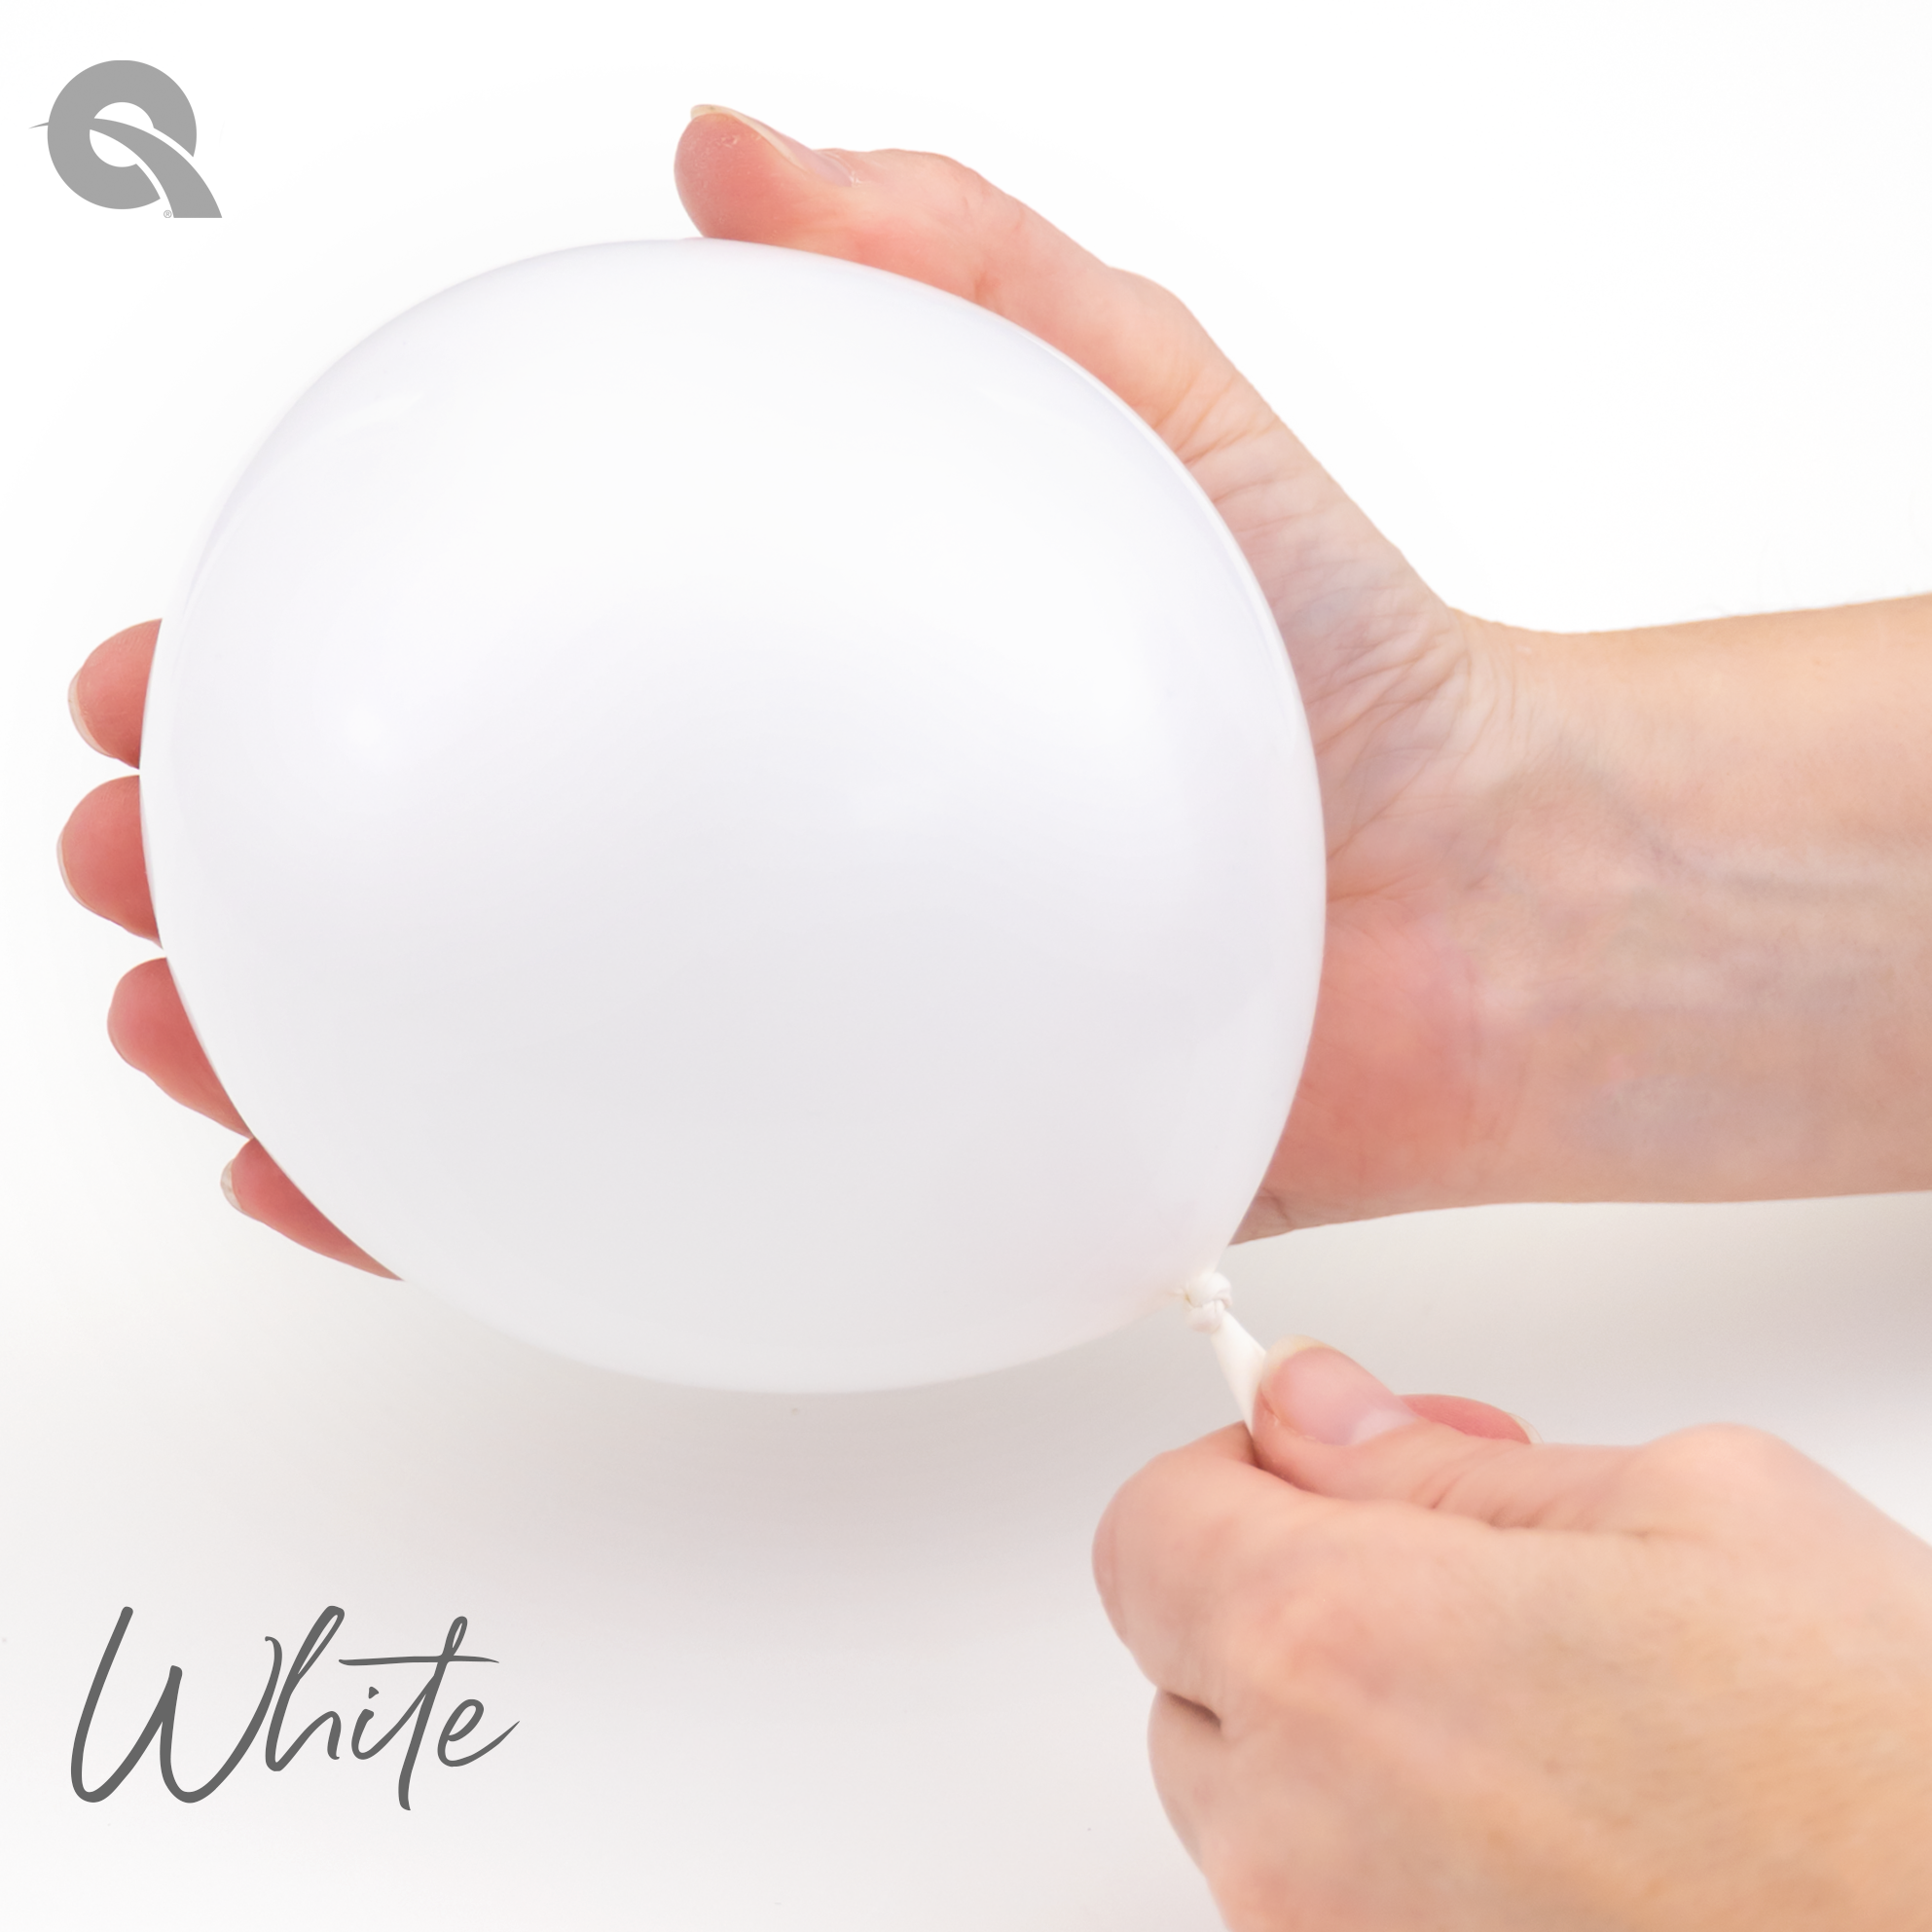 6" Qualatex QuickLink® White Latex Balloons | 50 Count